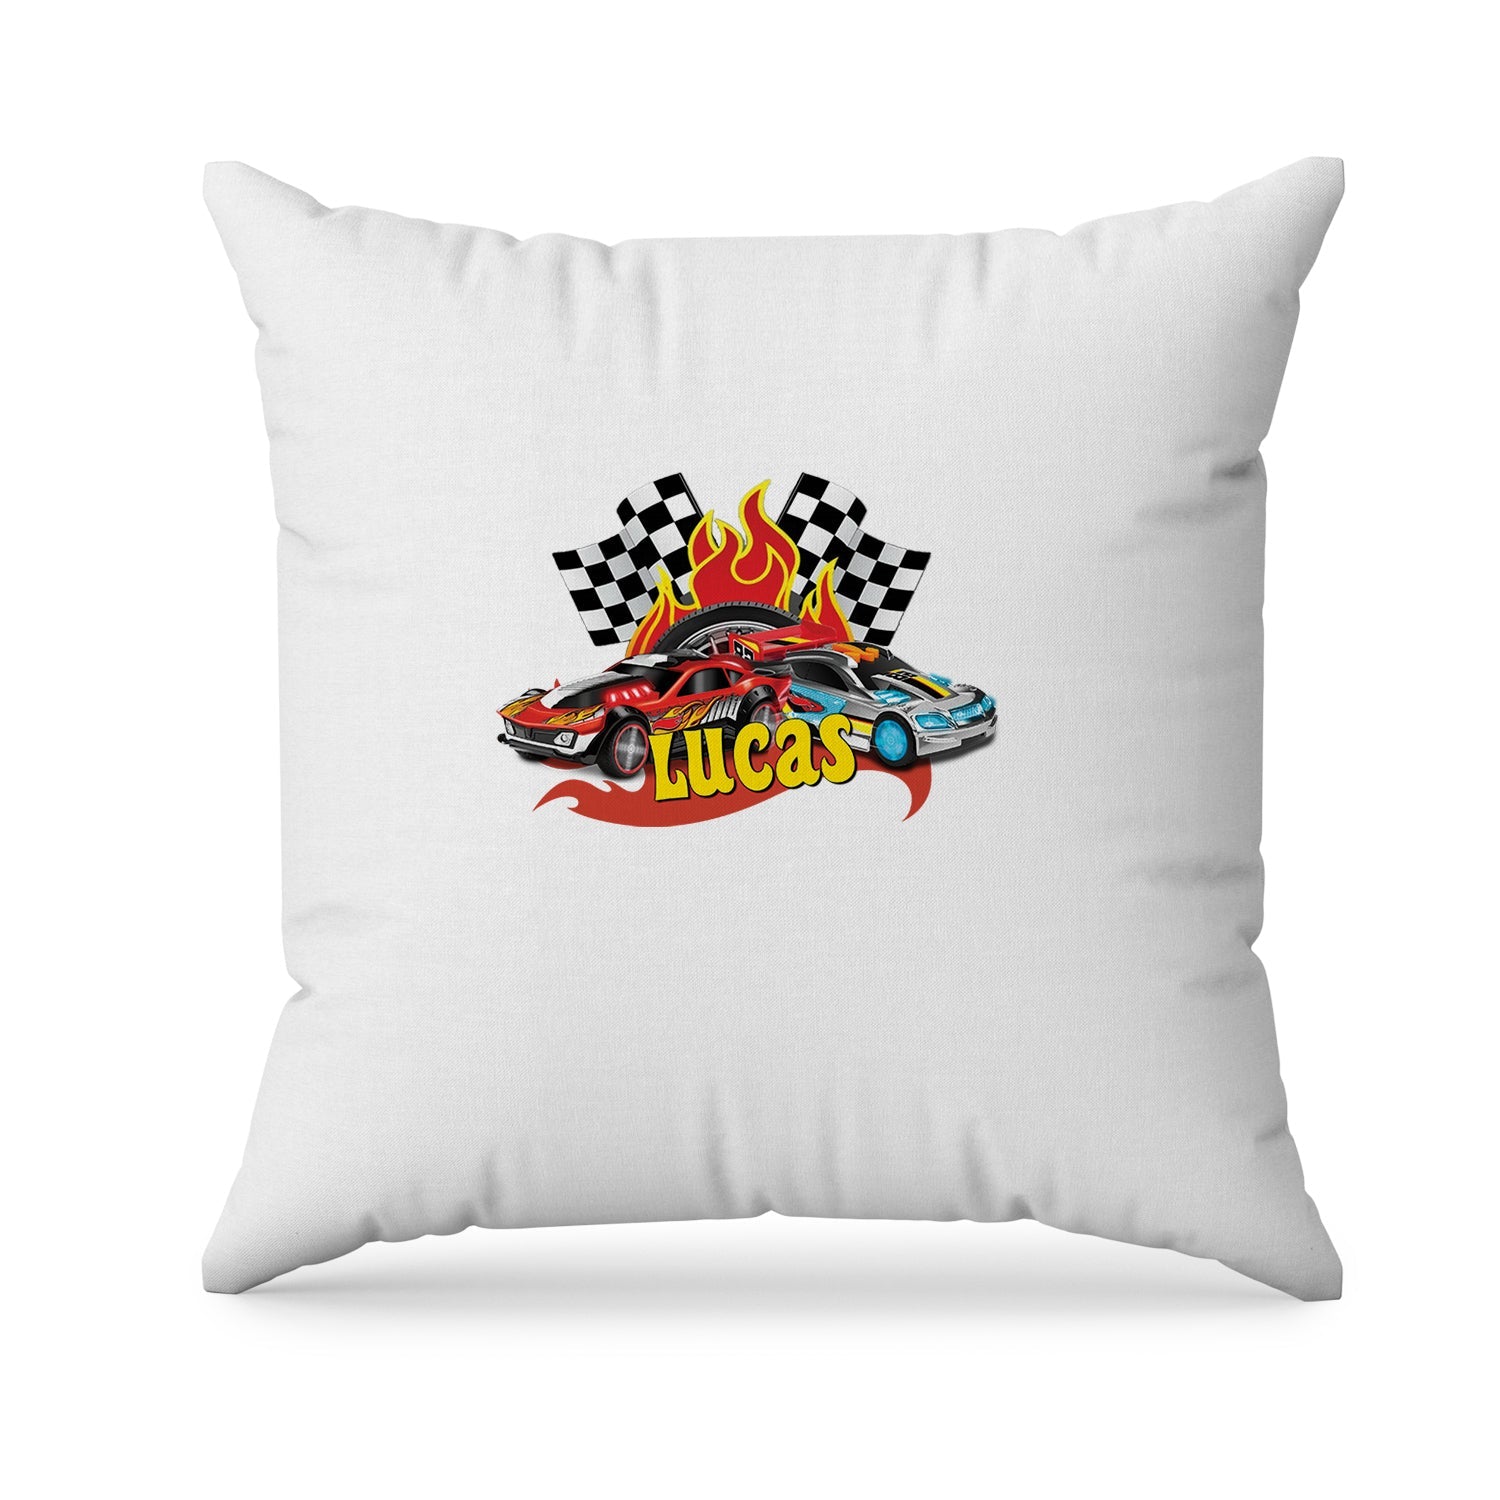 Sublimation Pillowcase with Hot Wheels Theme